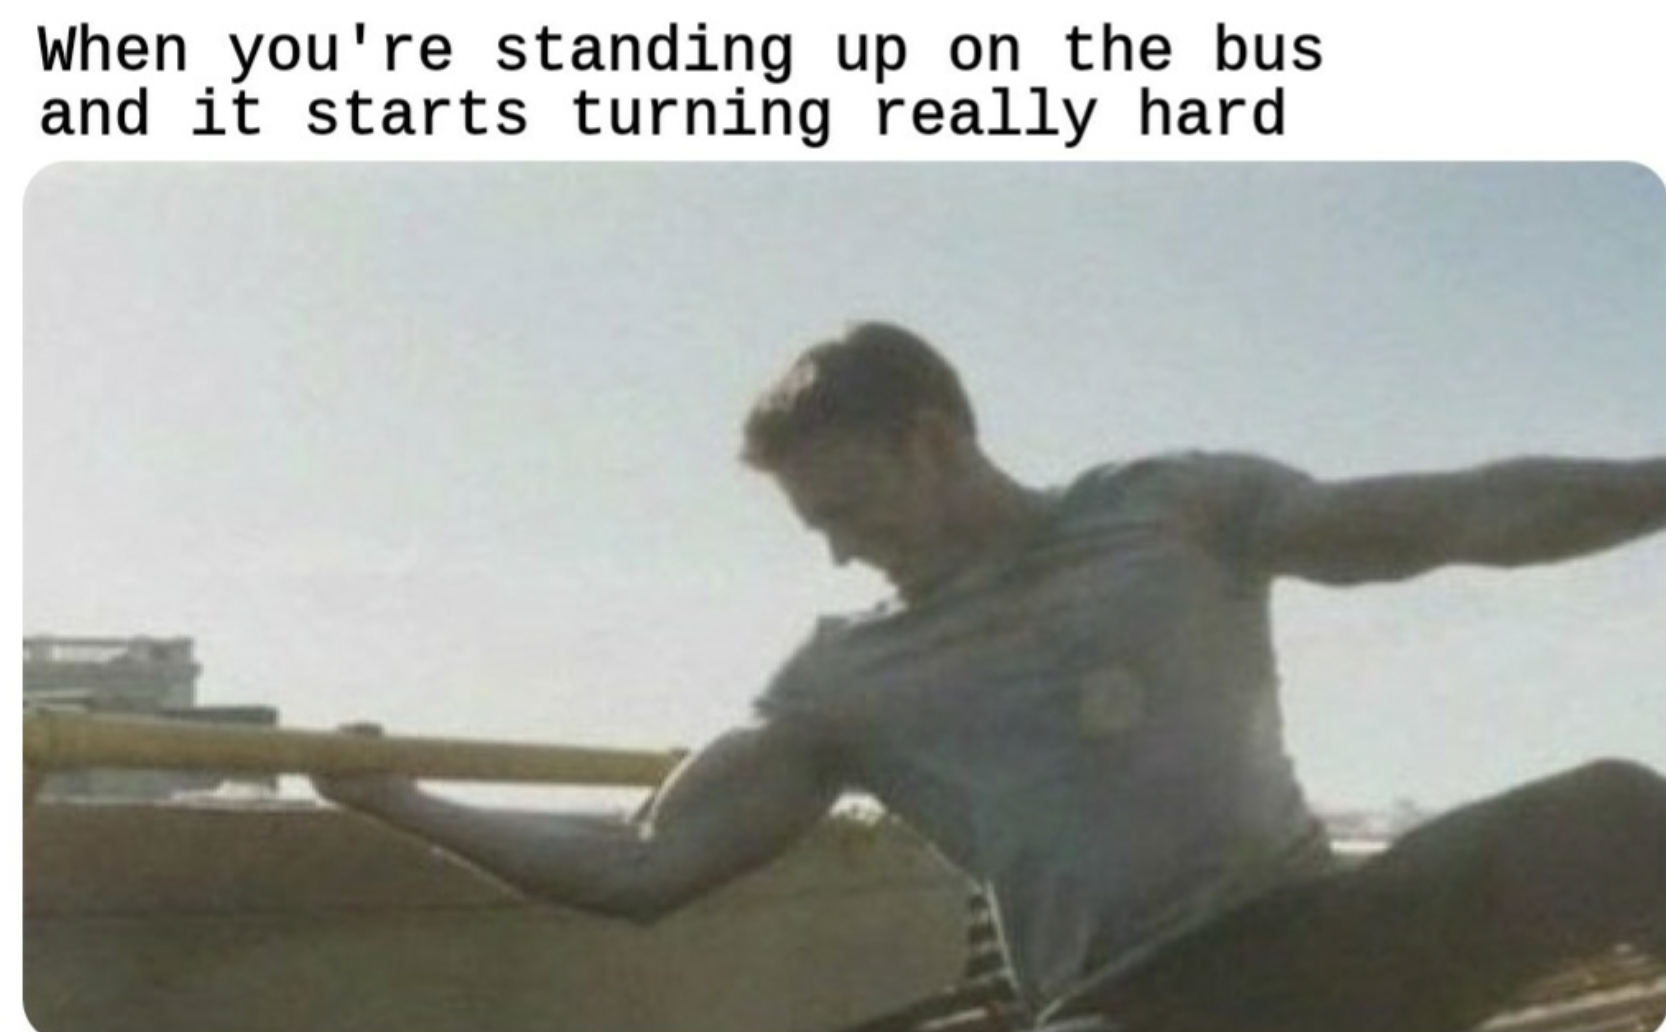 photo caption - When you're standing up on the bus and it starts turning really hard